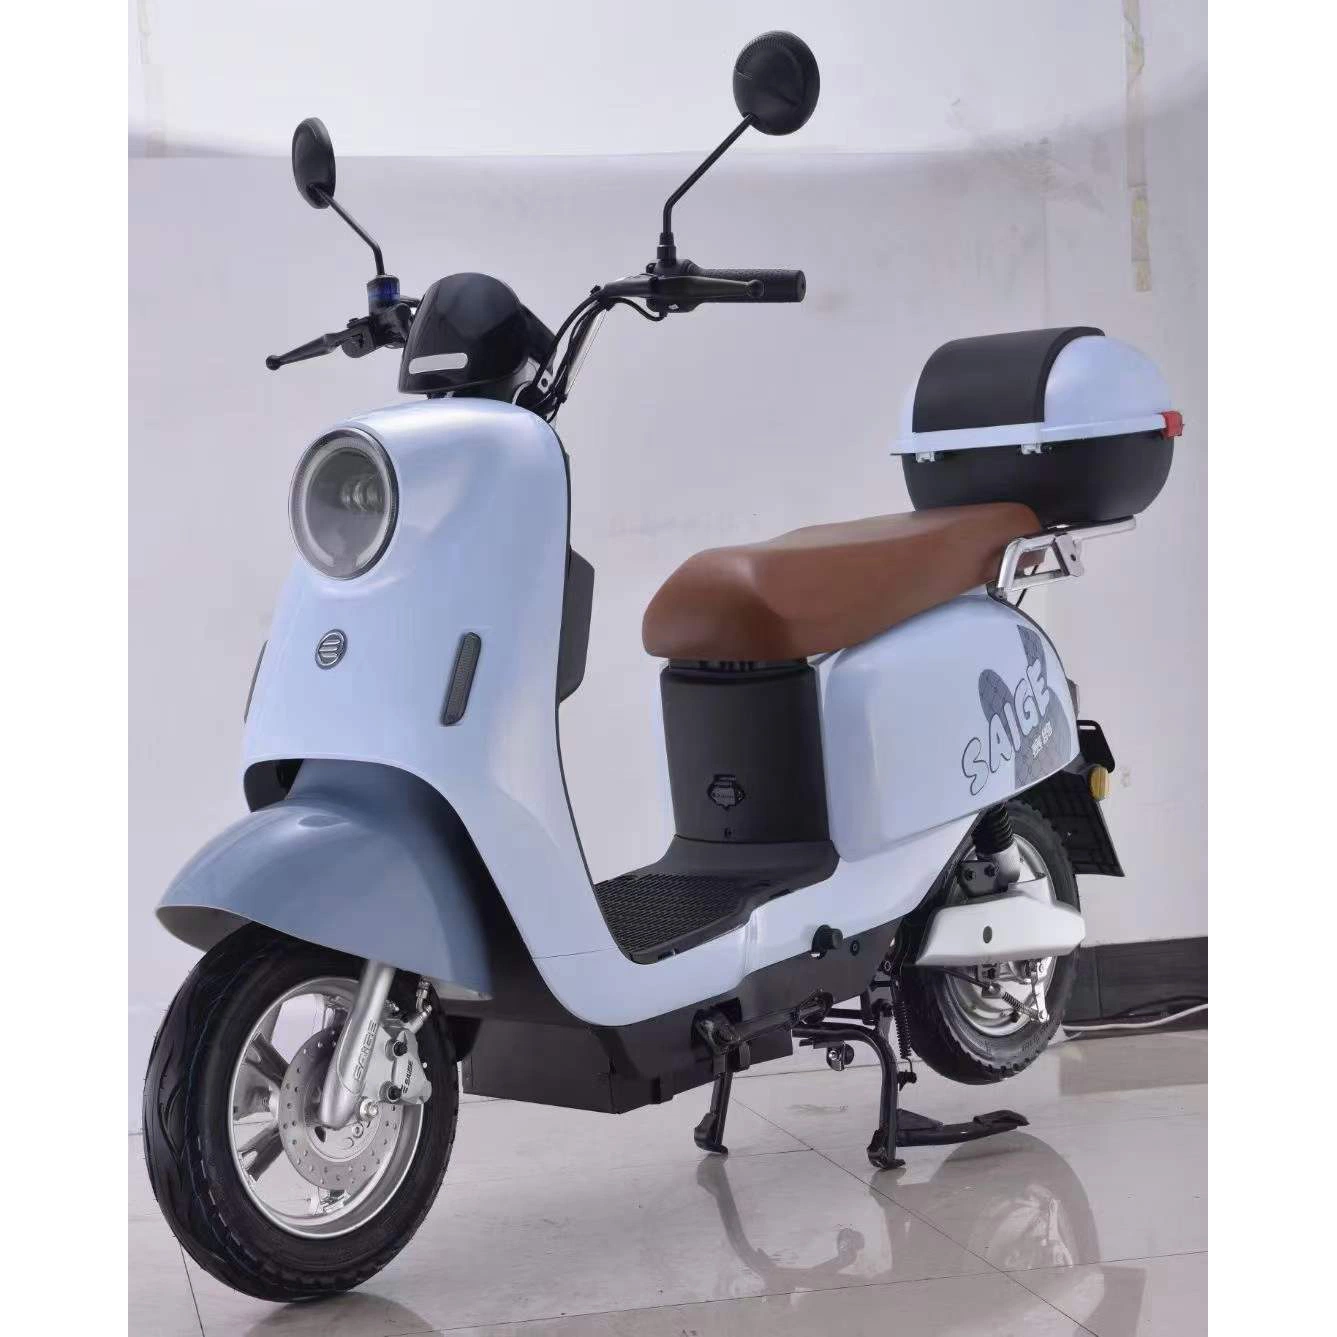 Saige Mini Electric Motorcycle Scooter with Pedals 350W 2 Wheeler EV for Adult Ladies Small Scooter Moped with Storage